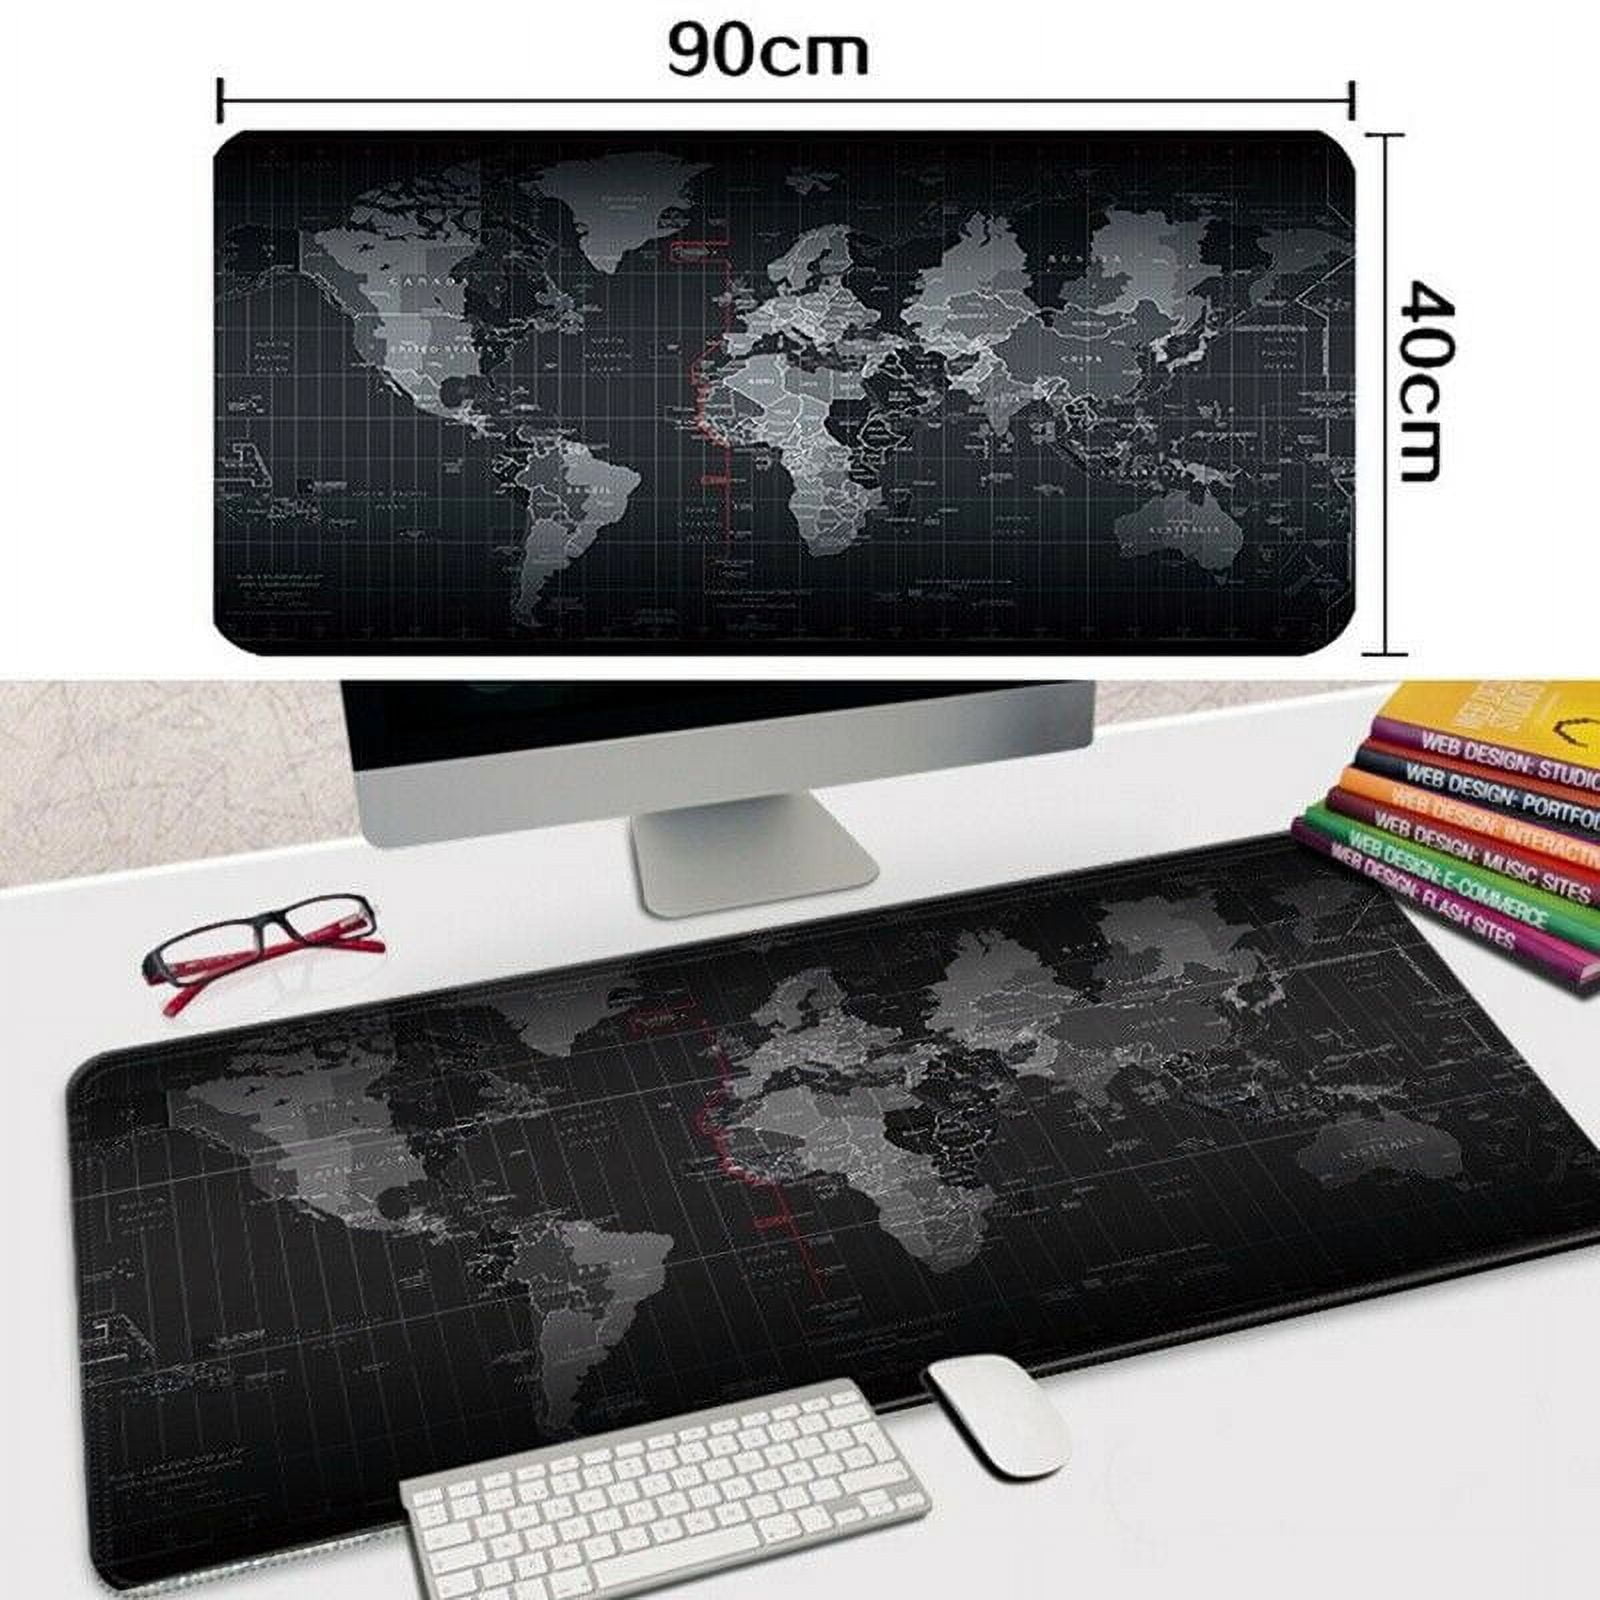 Apottwal World Map Desk Pad with Stitched Edge,XXL Desk Mat for Desk,Large  Gaming Mouse Pad with Non-Slip Rubber Base,Waterproof Keyboard Pad,Desk  Accessories Desk Protector for Office Home 